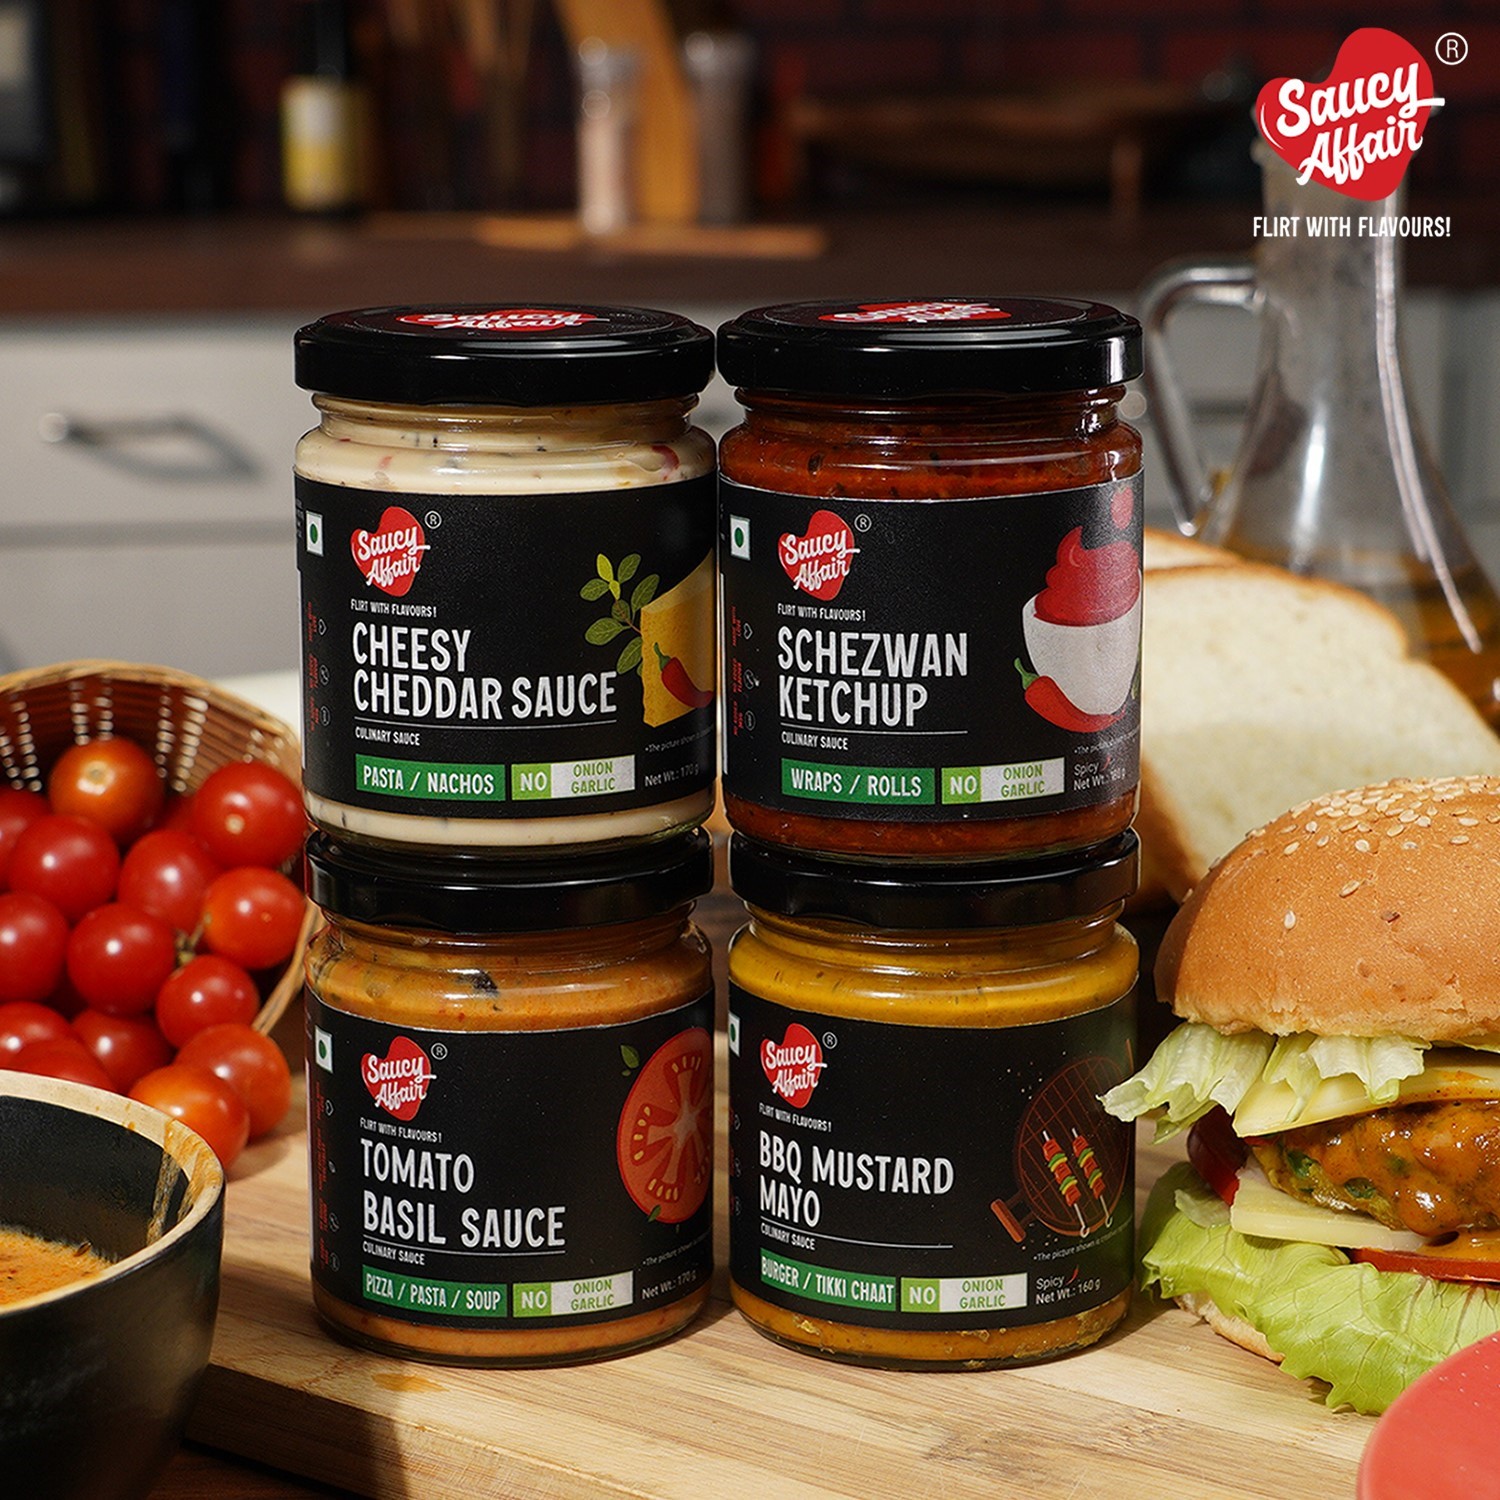 “Dip, Cook, Spread, Enjoy, Saucy Affair’s Sauces Bring Convenience and Flavors to Every Indian Kitchen”